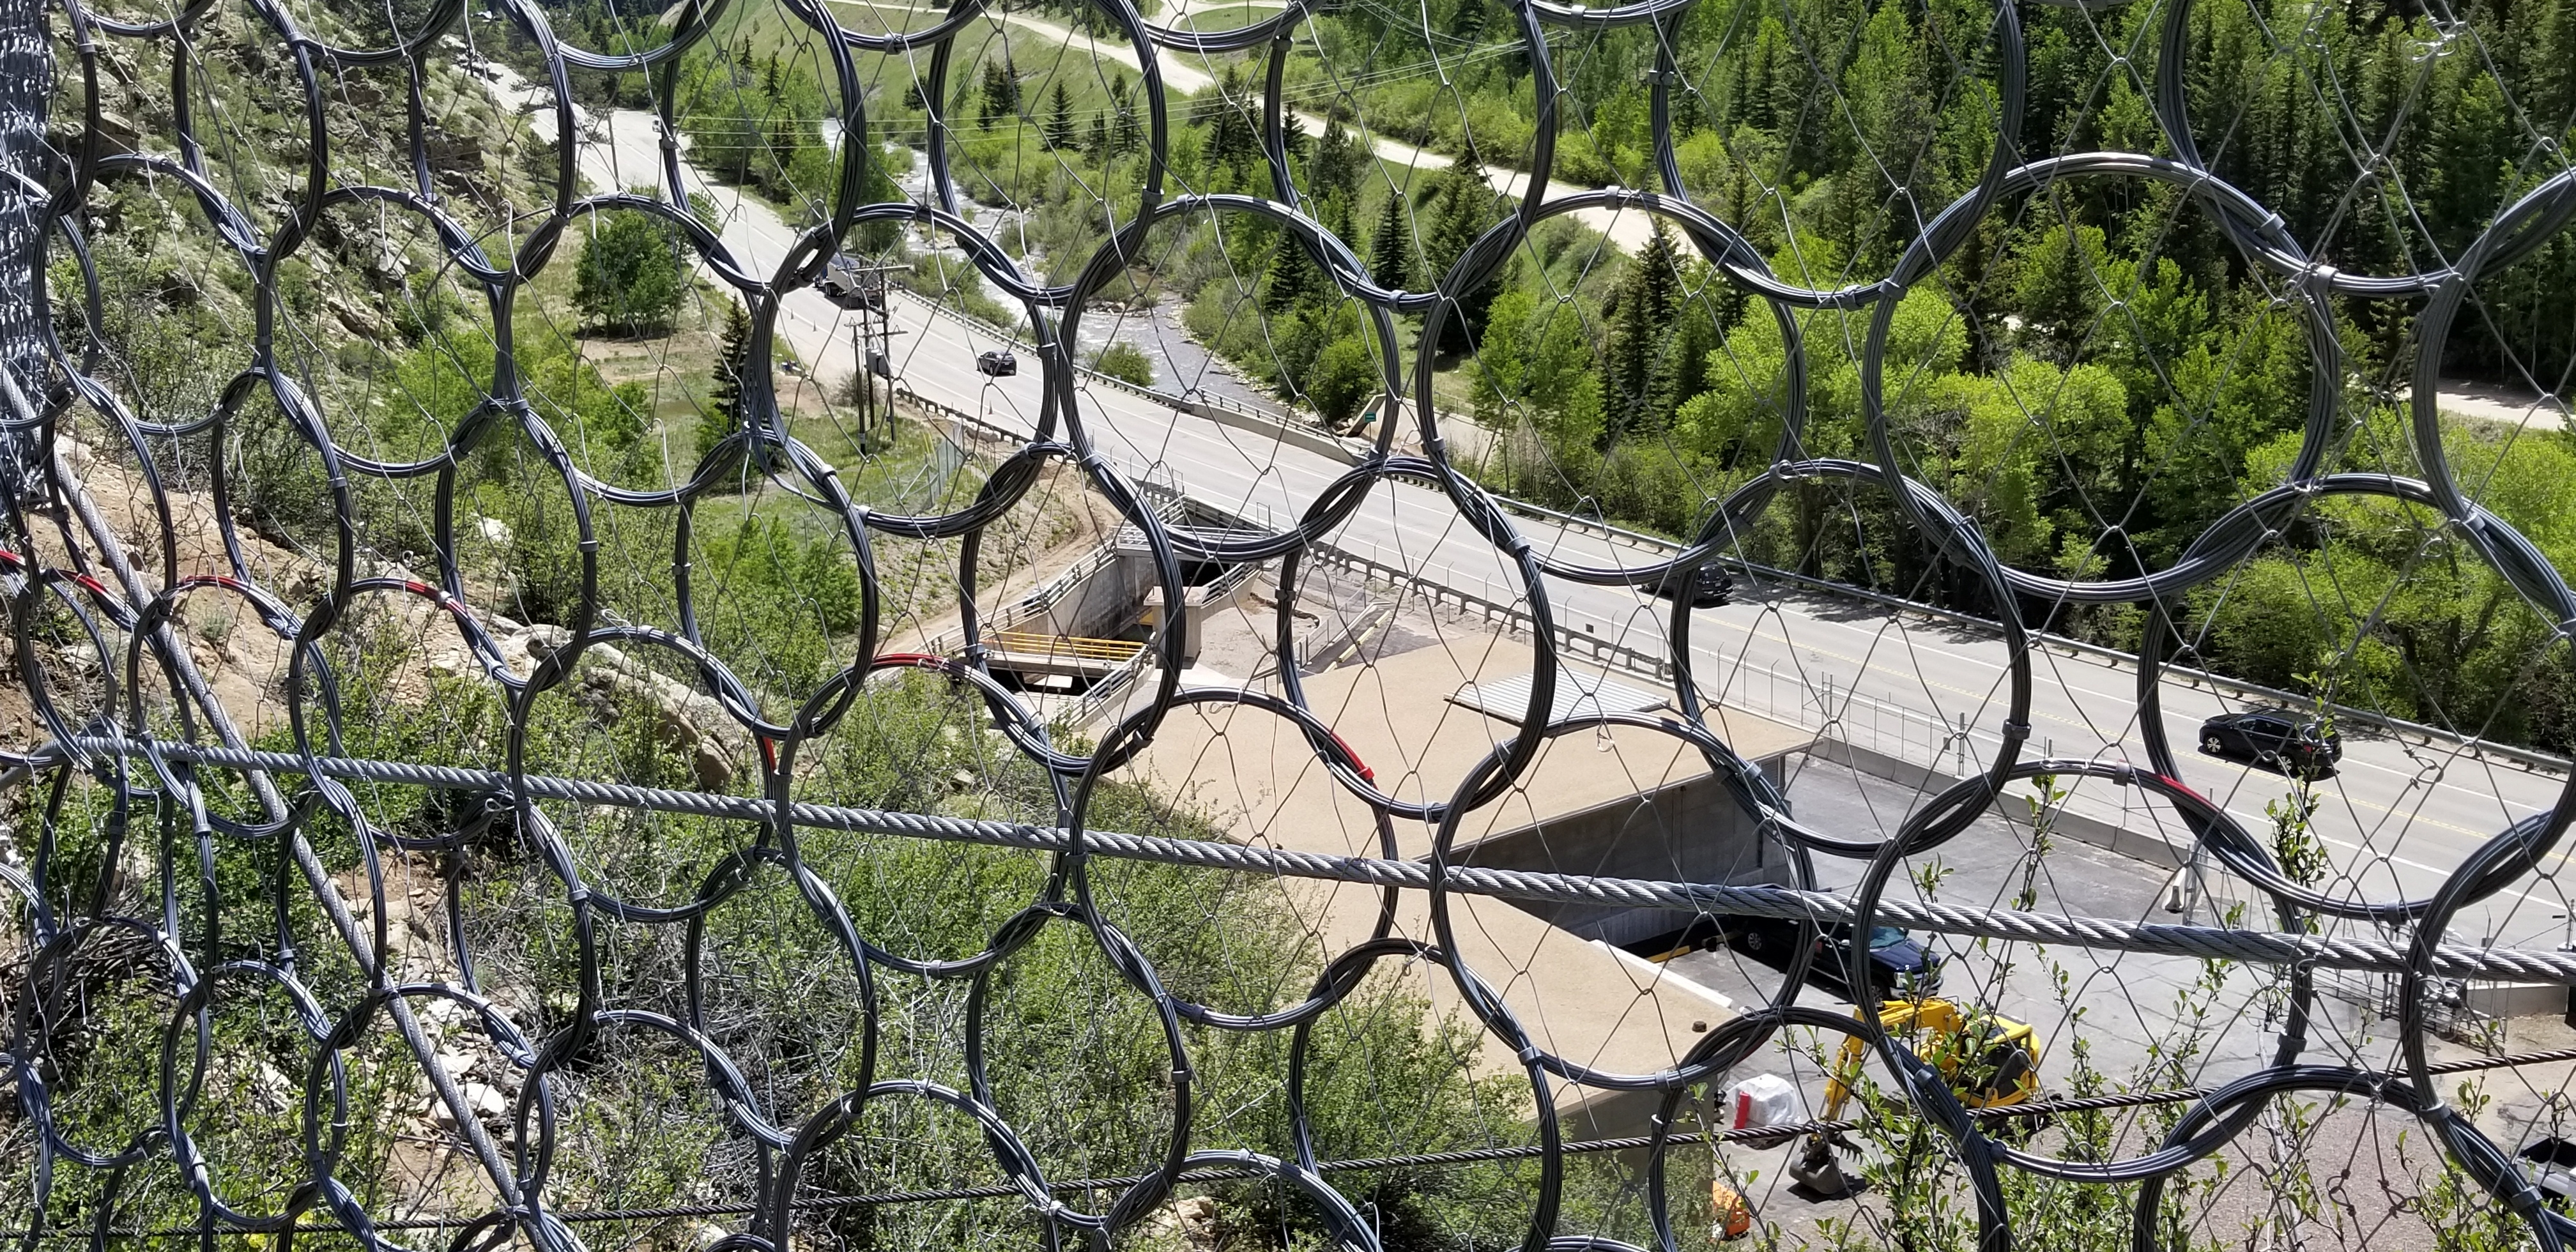 New rockfall fencing will protect Denver Water's upgraded hydroelectric plant and staff at the Roberts Tunnel.